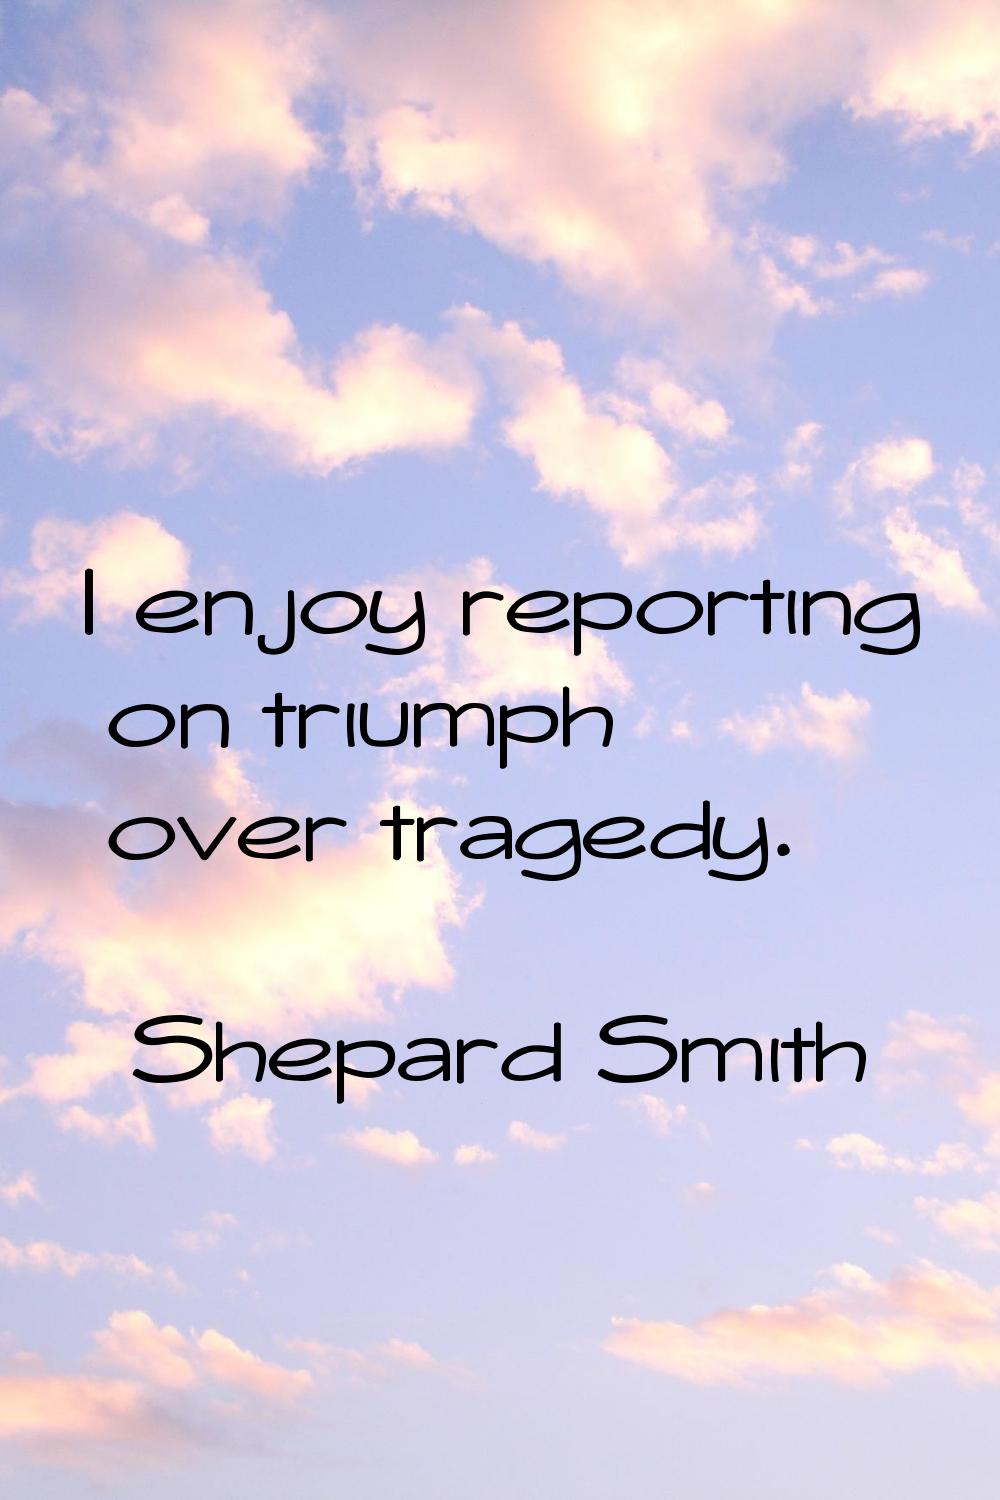 I enjoy reporting on triumph over tragedy.